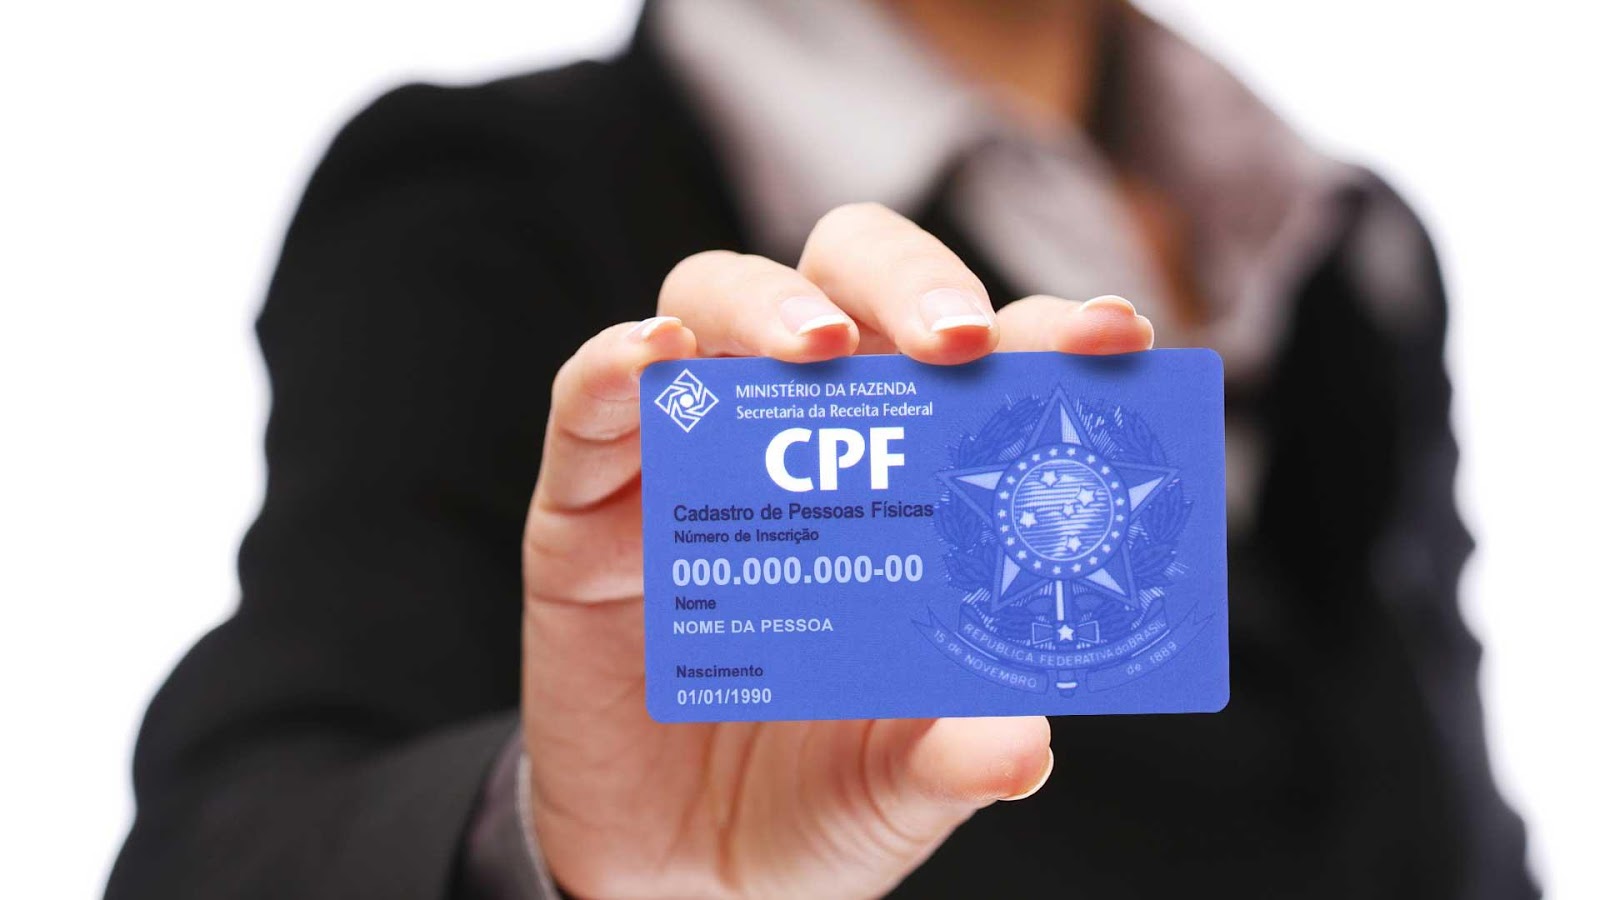 An individual will no longer be required to register to deal with a particular organization and will be able to provide the CPF.